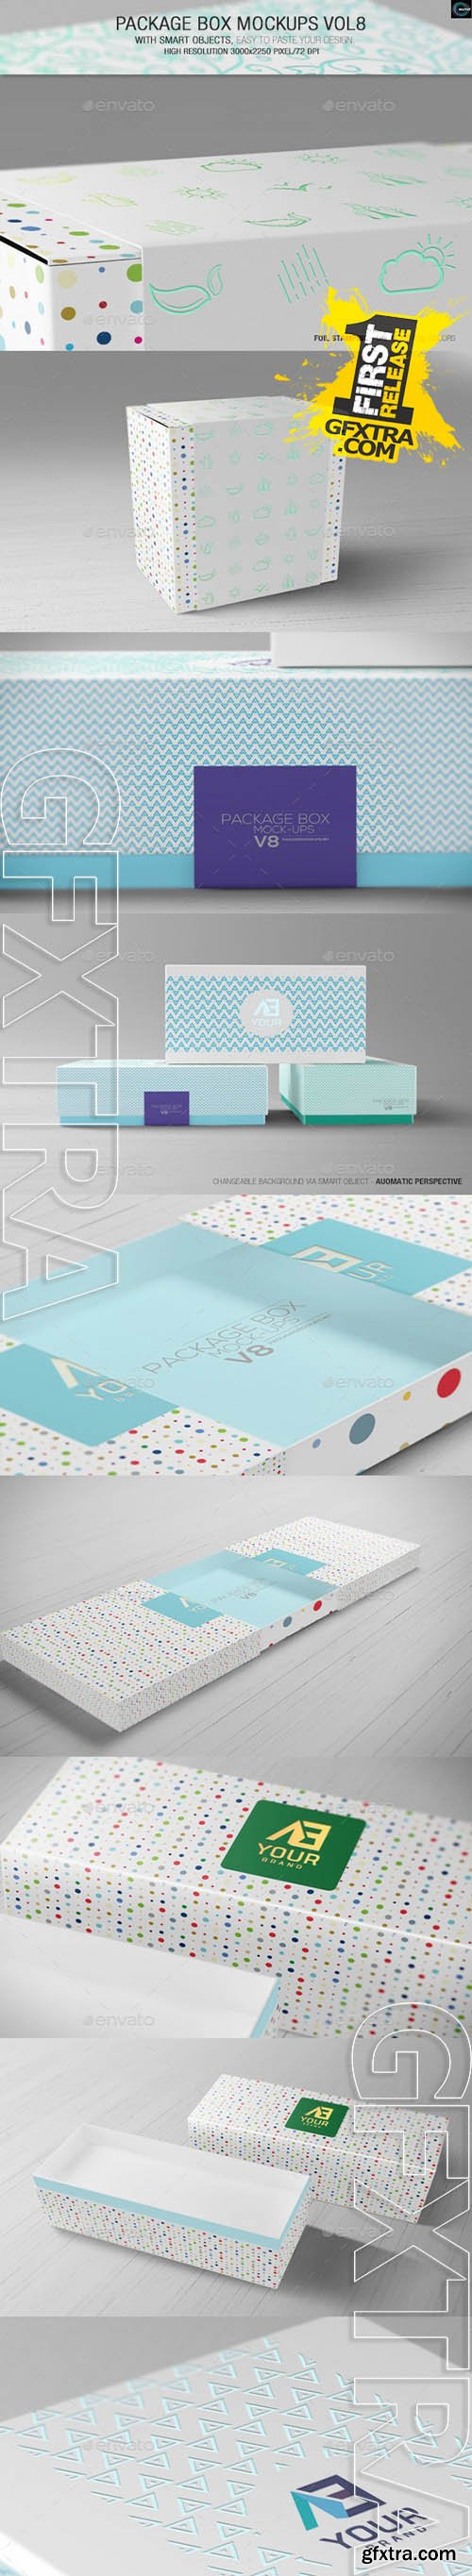 Package Box Mockups Vol8 - Graphicriver 10704514